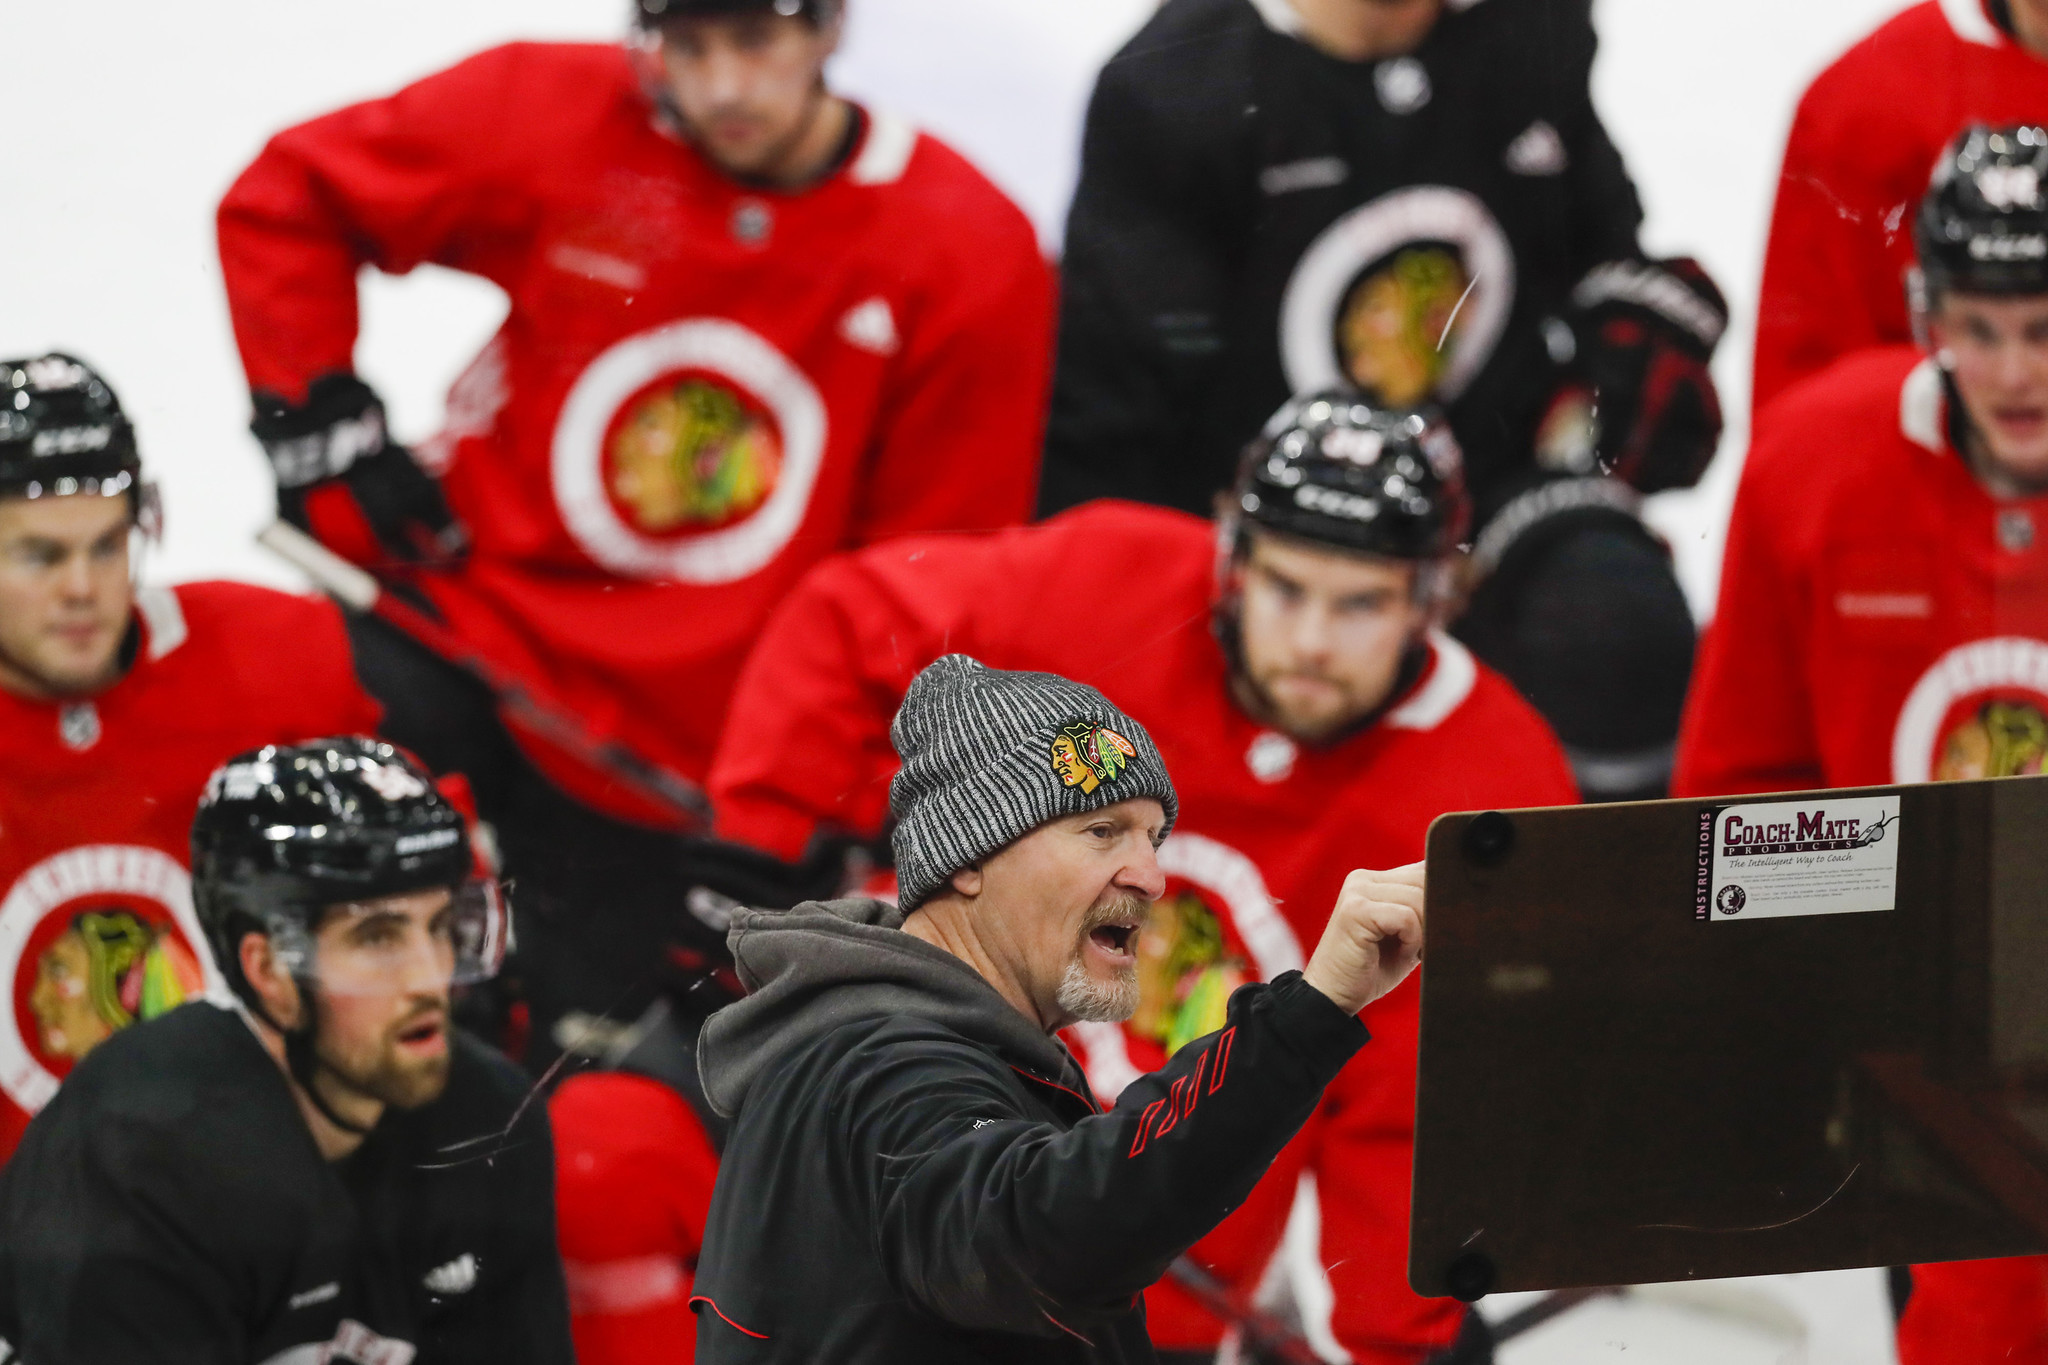 Derek King comfortable in new role as Blackhawks assistant: 'I